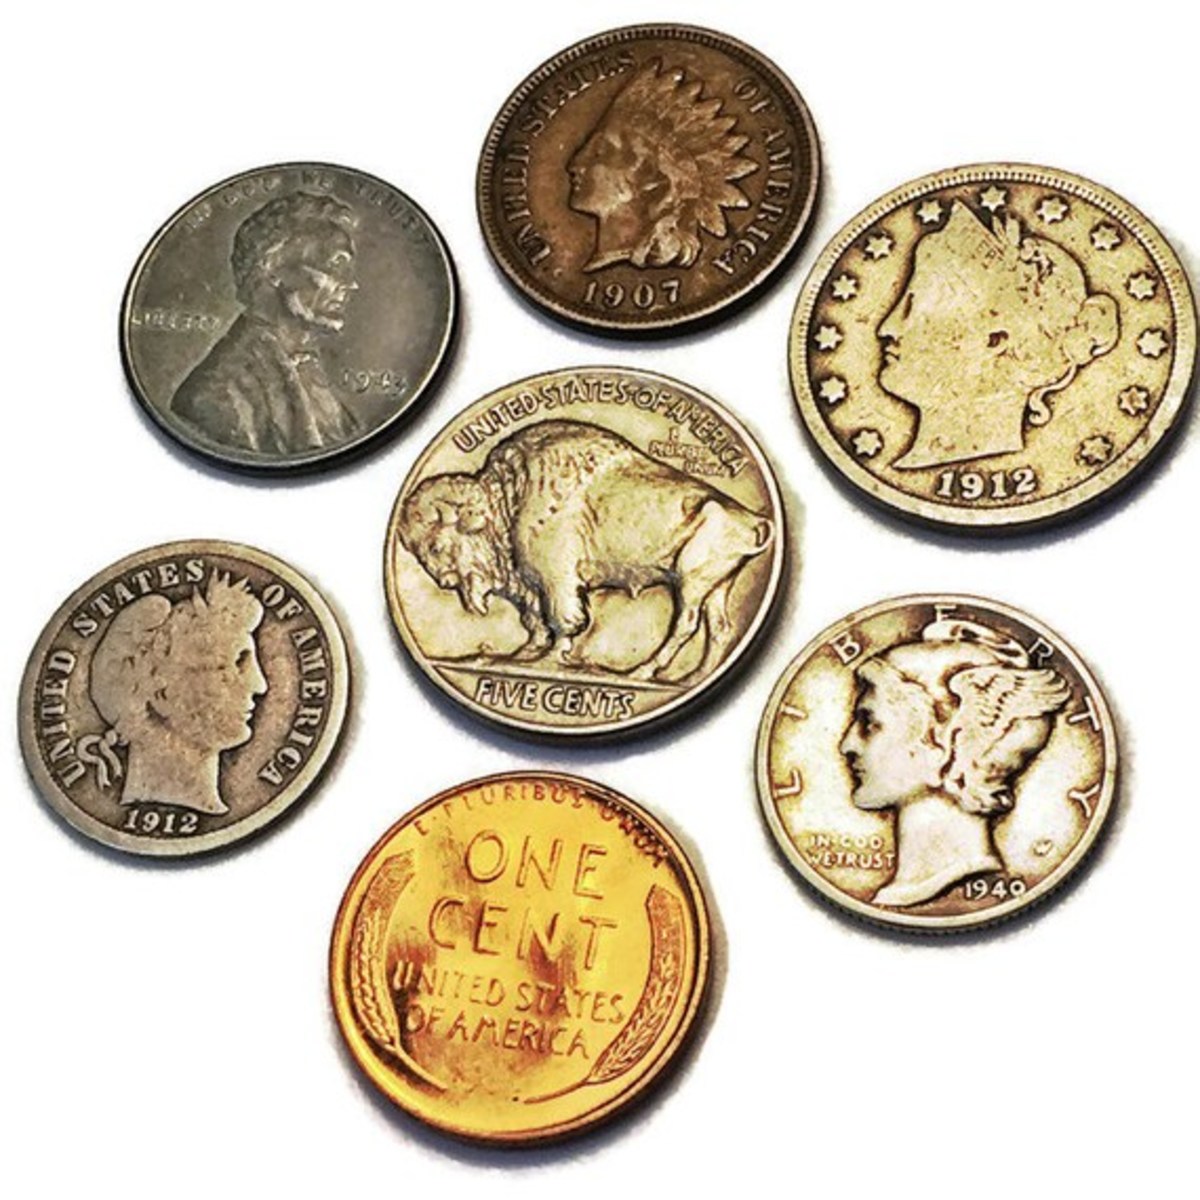 27 Mint Gifts For Coin Collectors And Numismatists That Make Total Cents